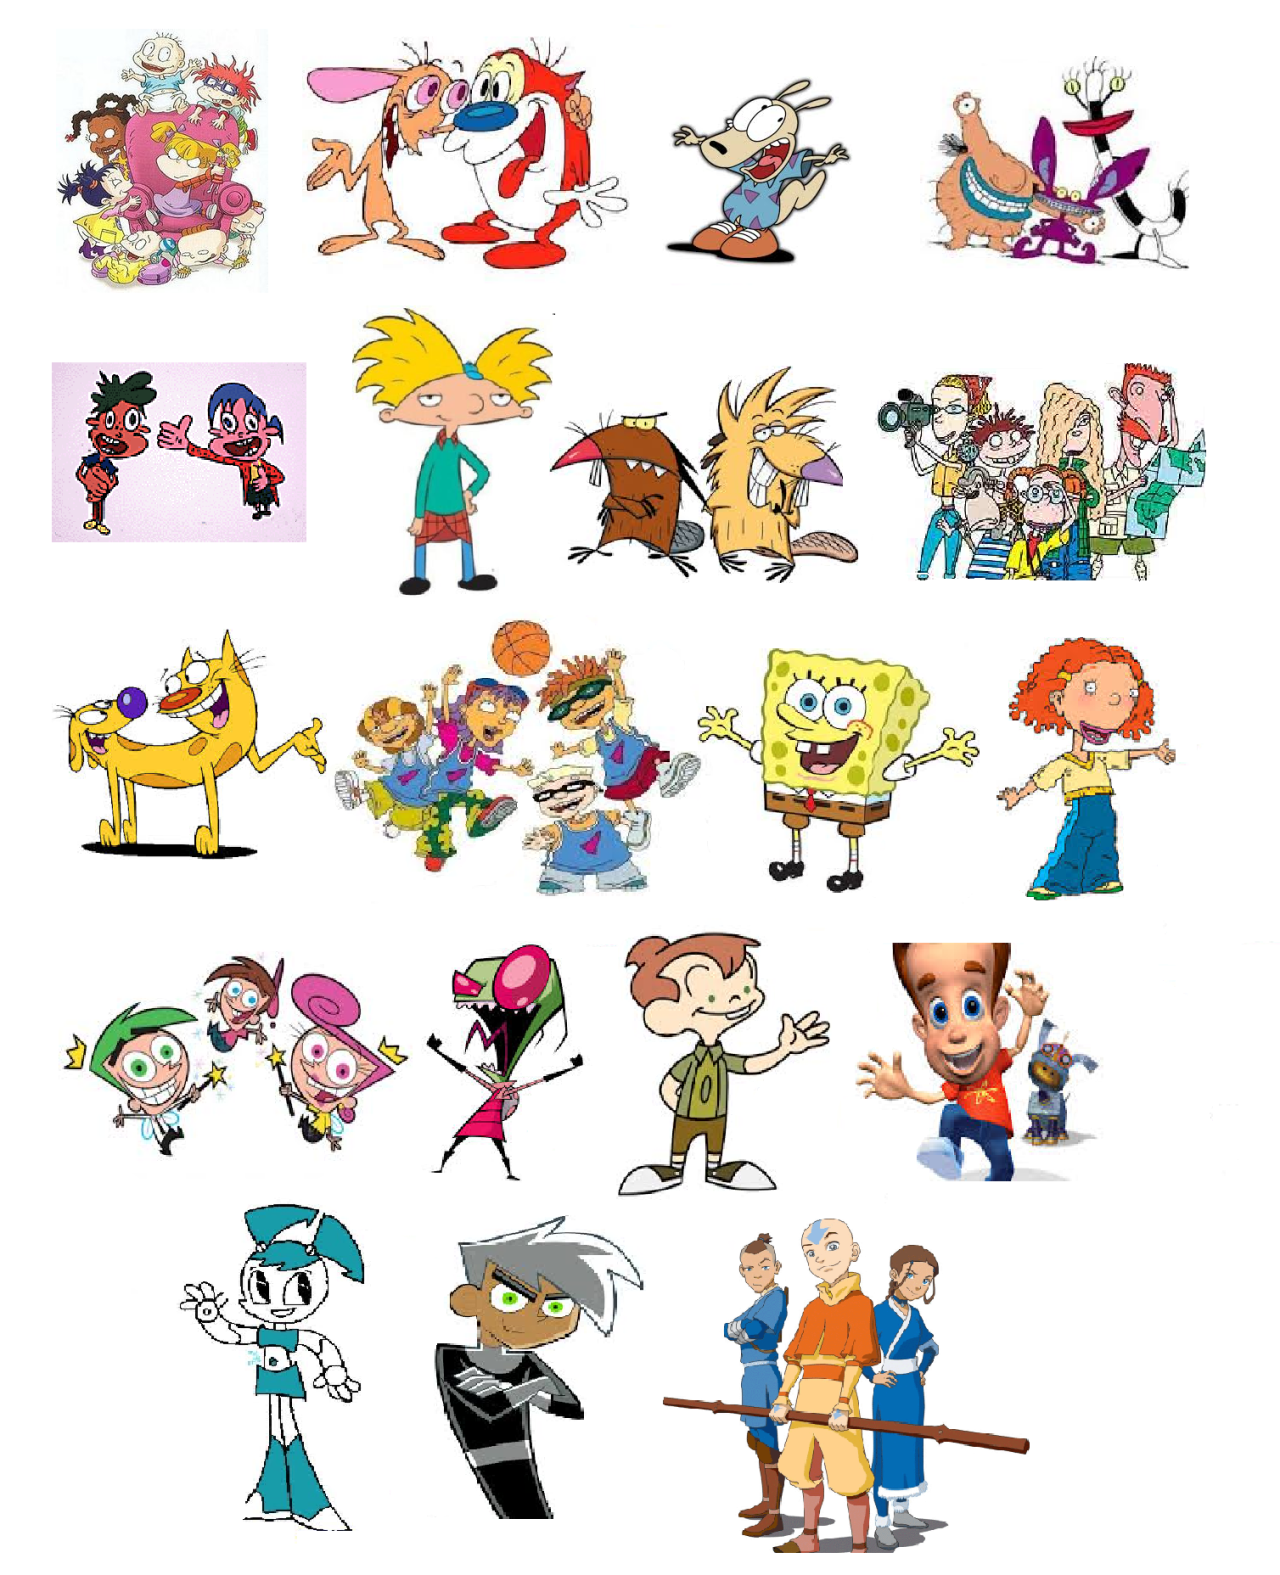 The Nicktoons shows loved through the years - Media Portfolio